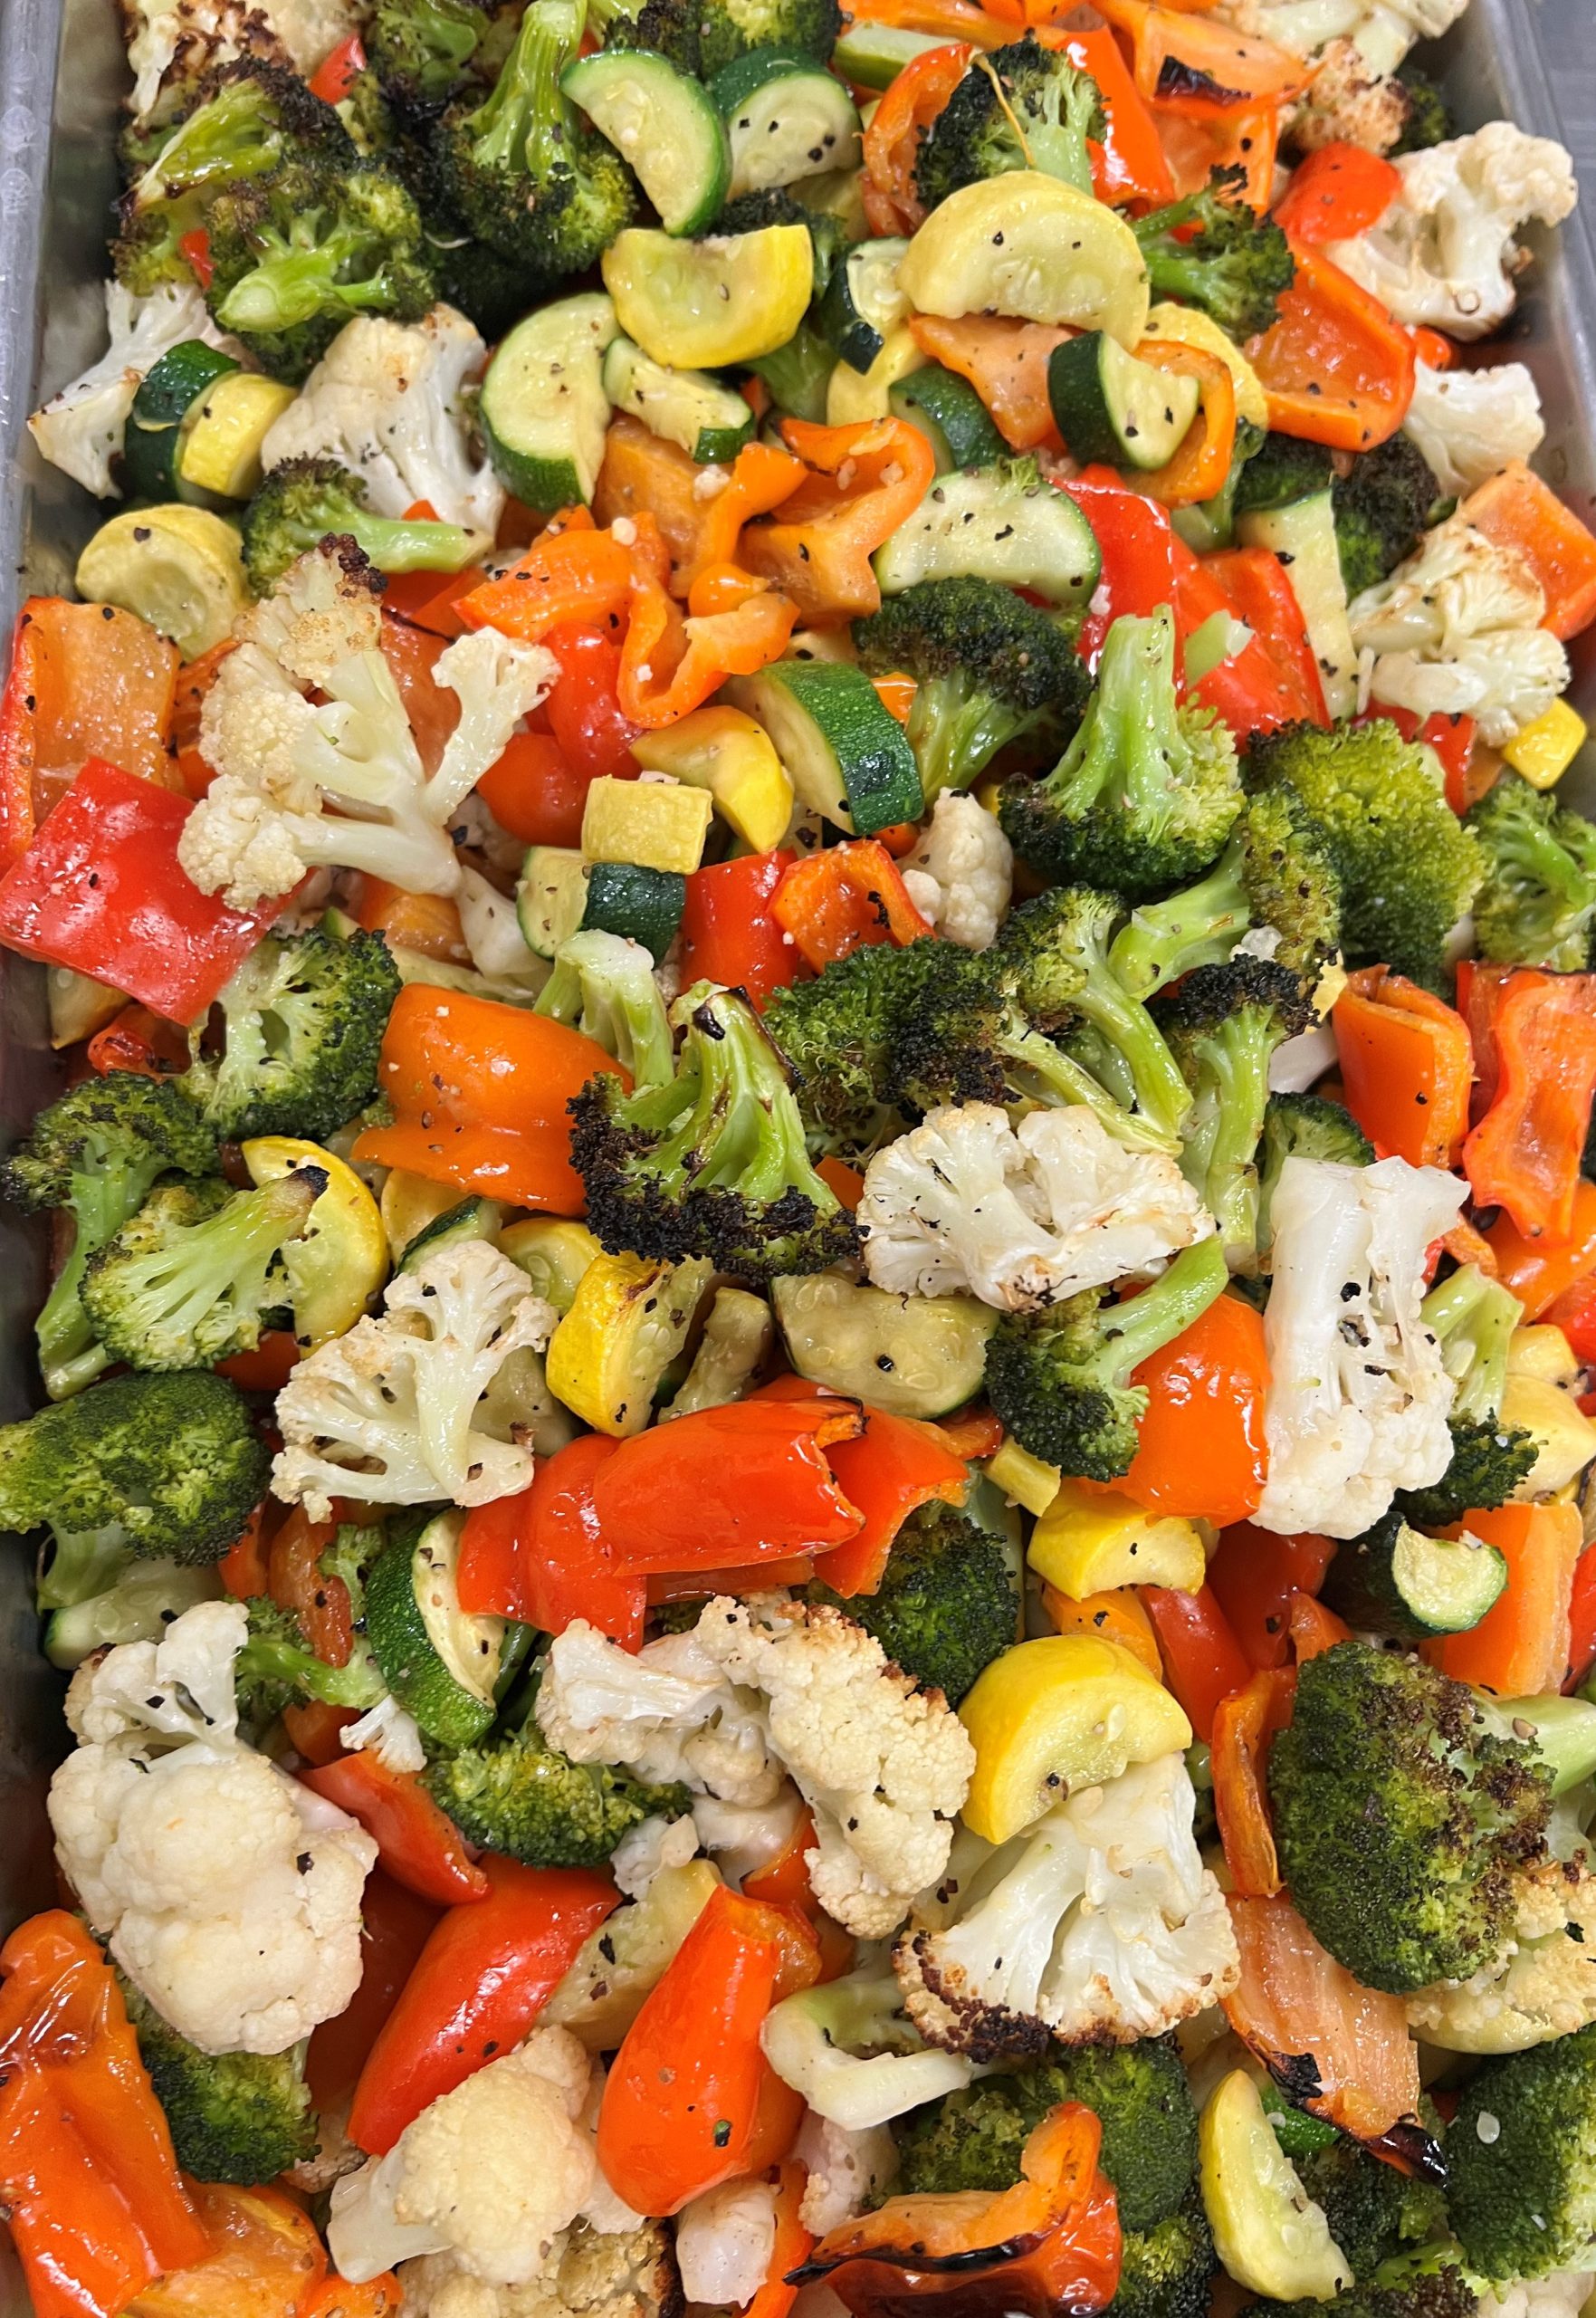 A pan full of vegetables on a table.